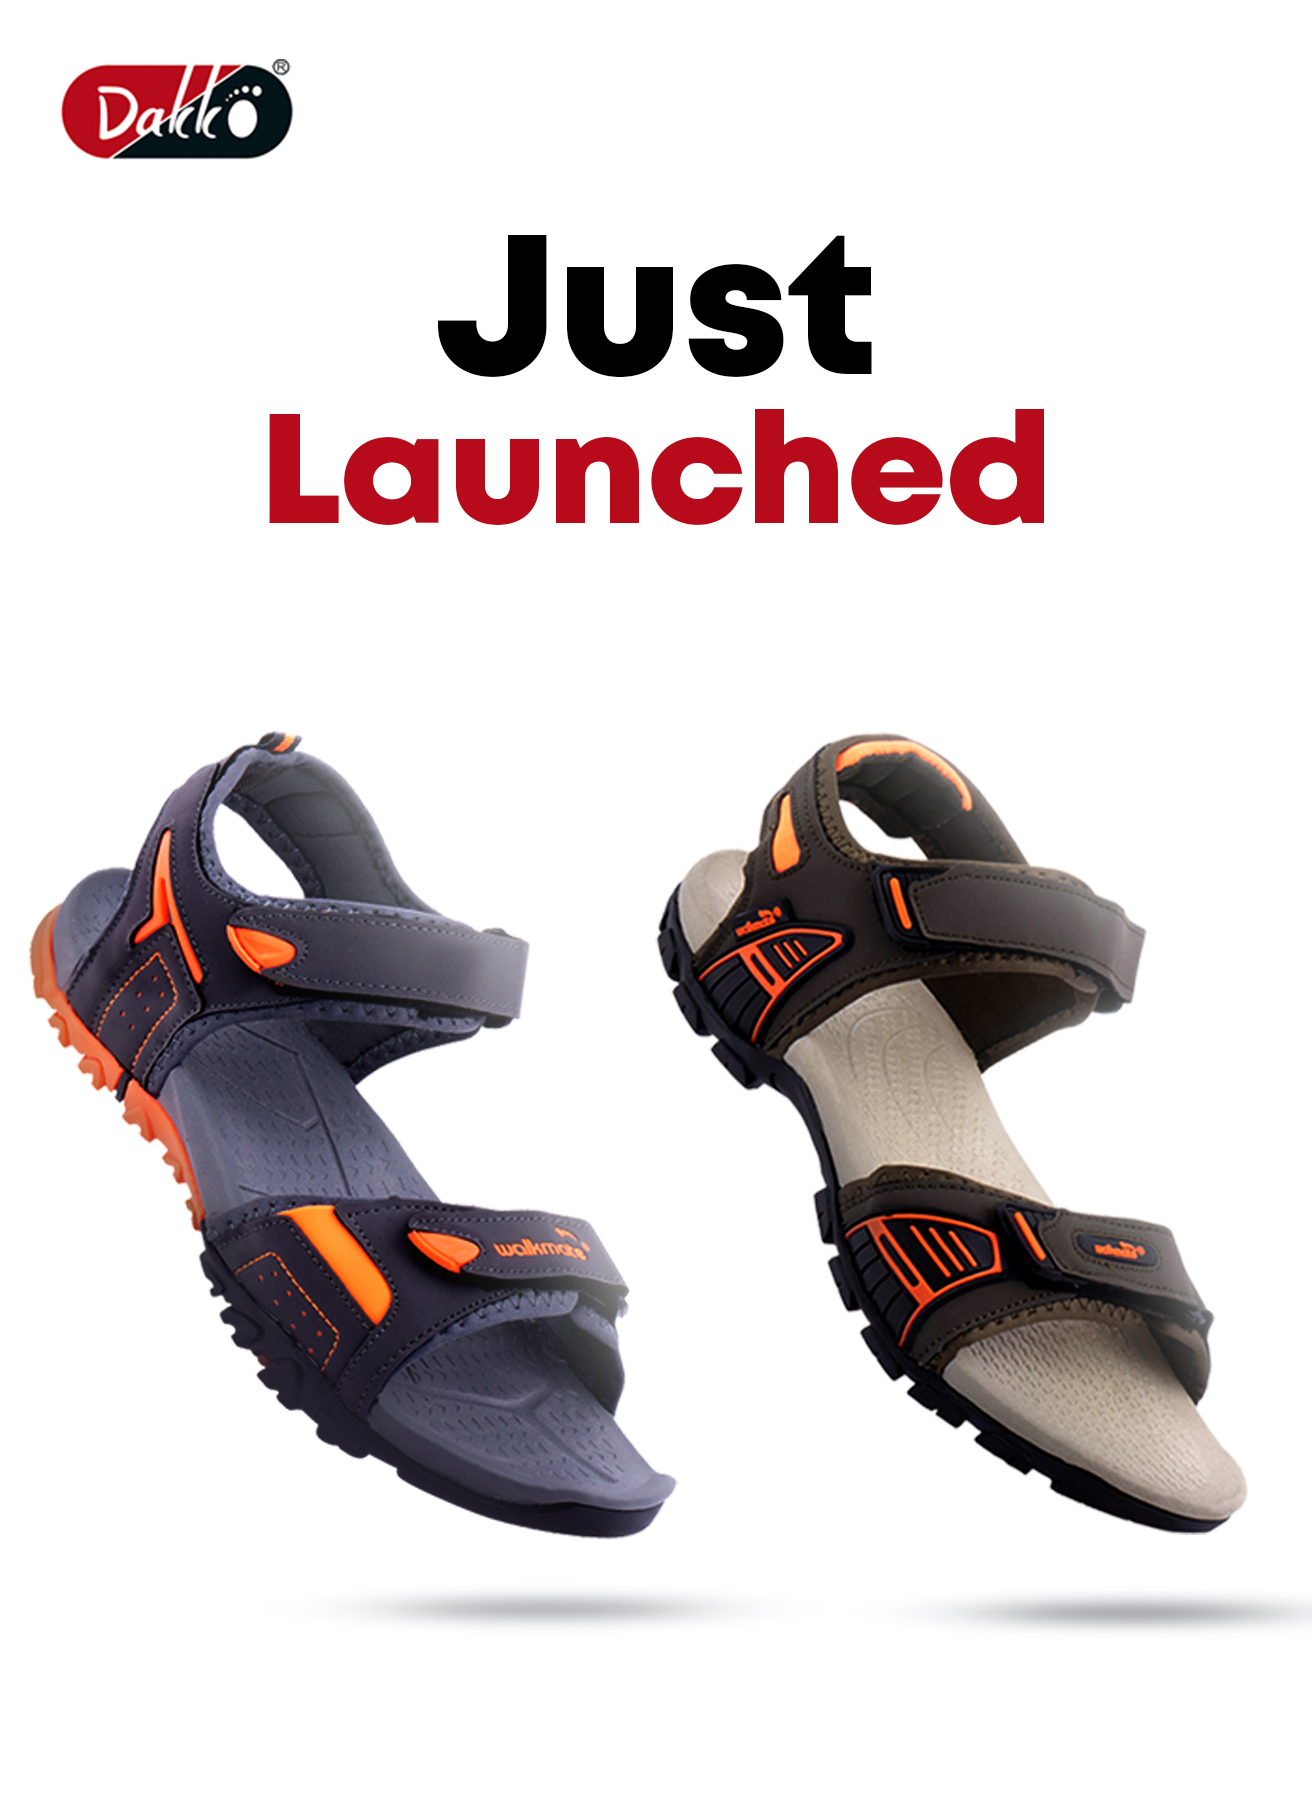 Ladies Footwear | Unmatched style and comfort footwear from Walkmate  Product Code: 3380 (Girls) Mail us at lunarexports@lunars.com #Walkmate  #PremiumQuality #Shoes... | By Walkmate | Facebook